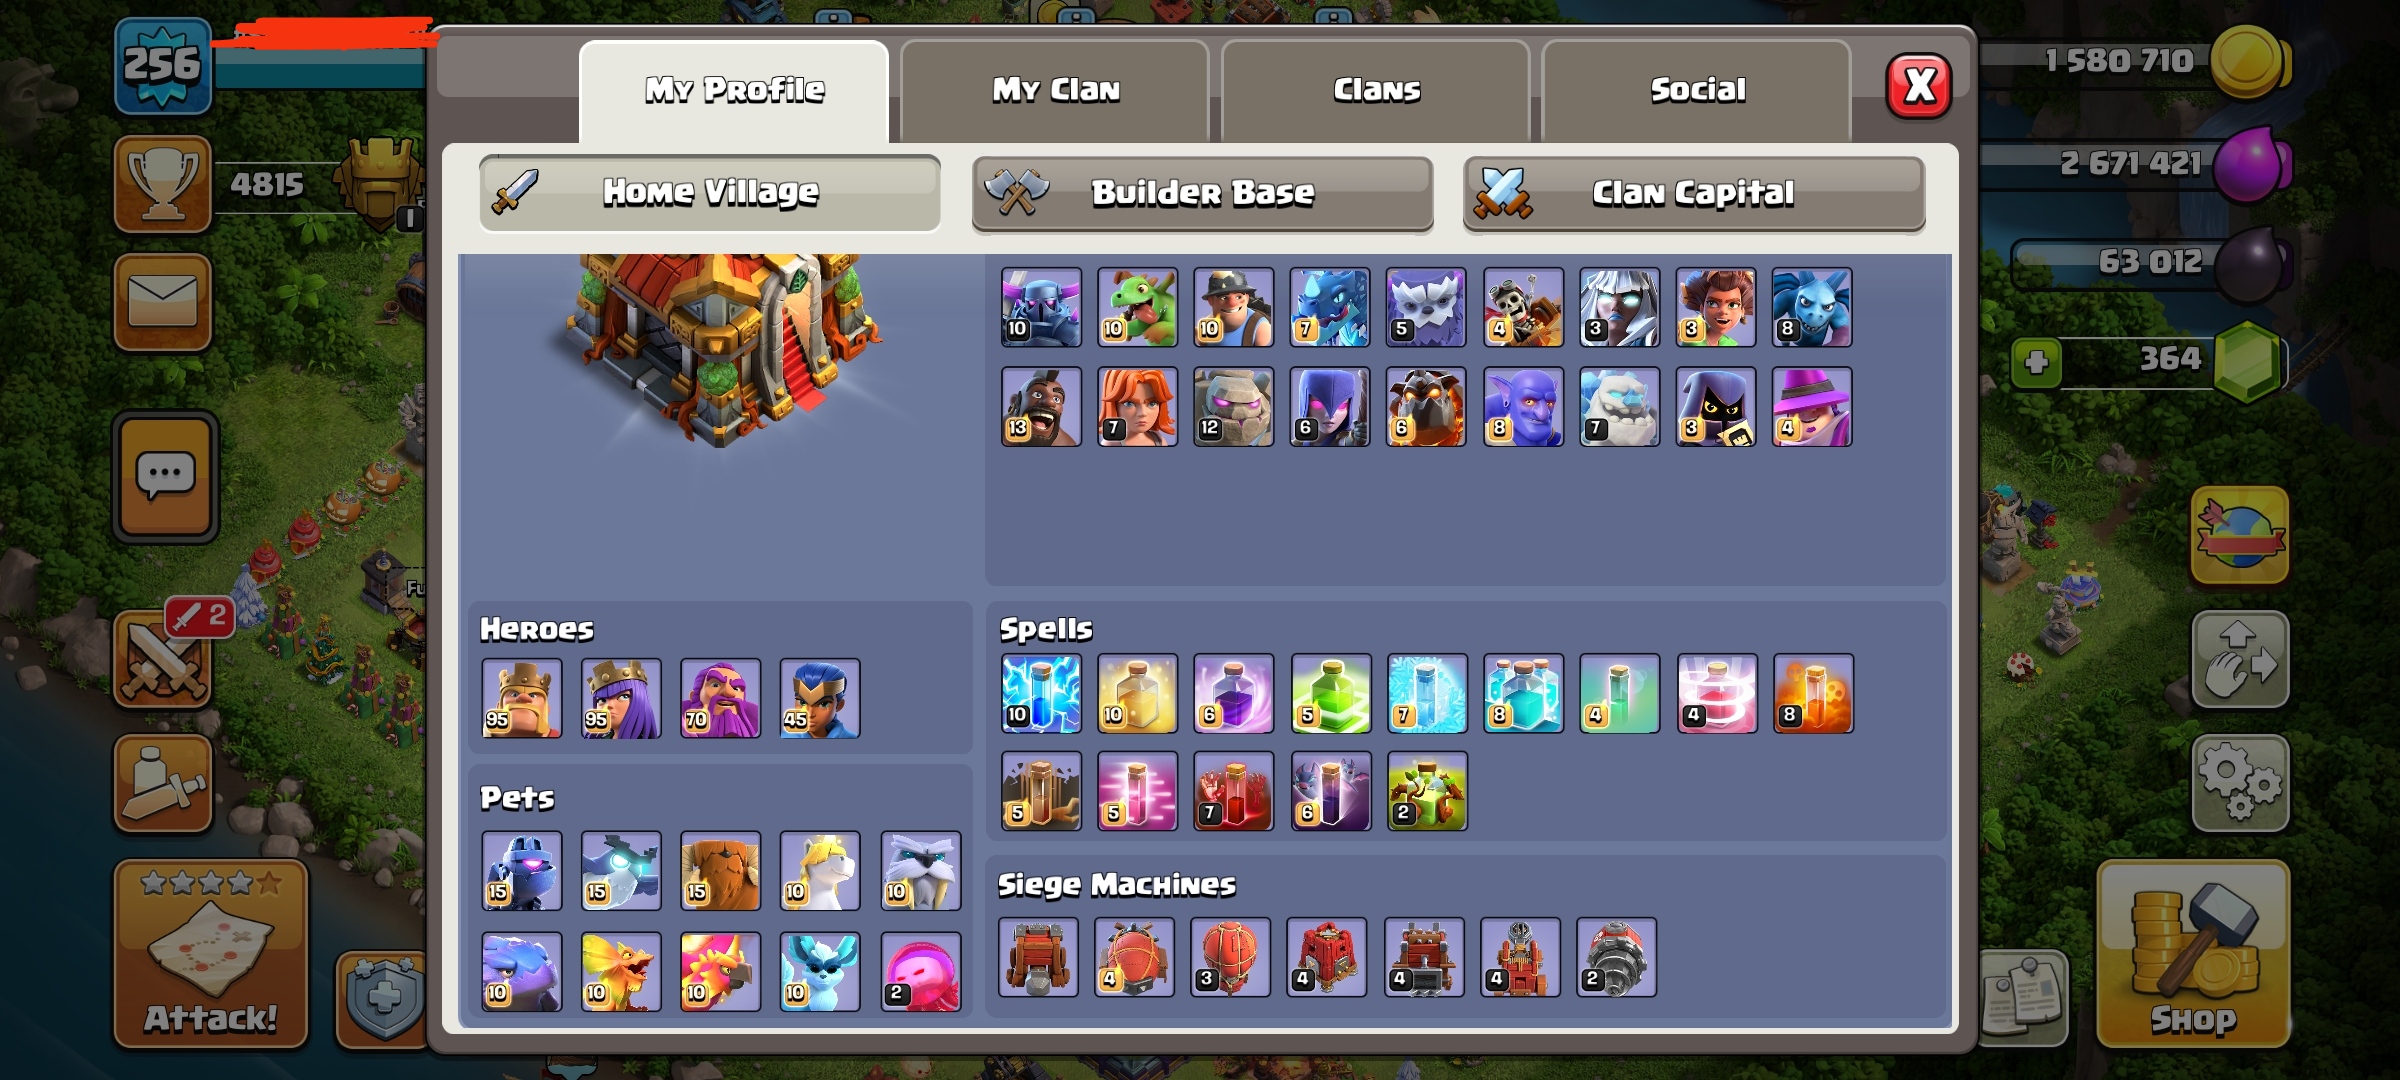 98% Max Th16, Xp 256, All Heroes Max, Cambio Nome Gratuito, 2970 WAR STAR, PB 6104, LT 13396, GIANT GAUNTLET & FROZEN ARROW, Android e iOS